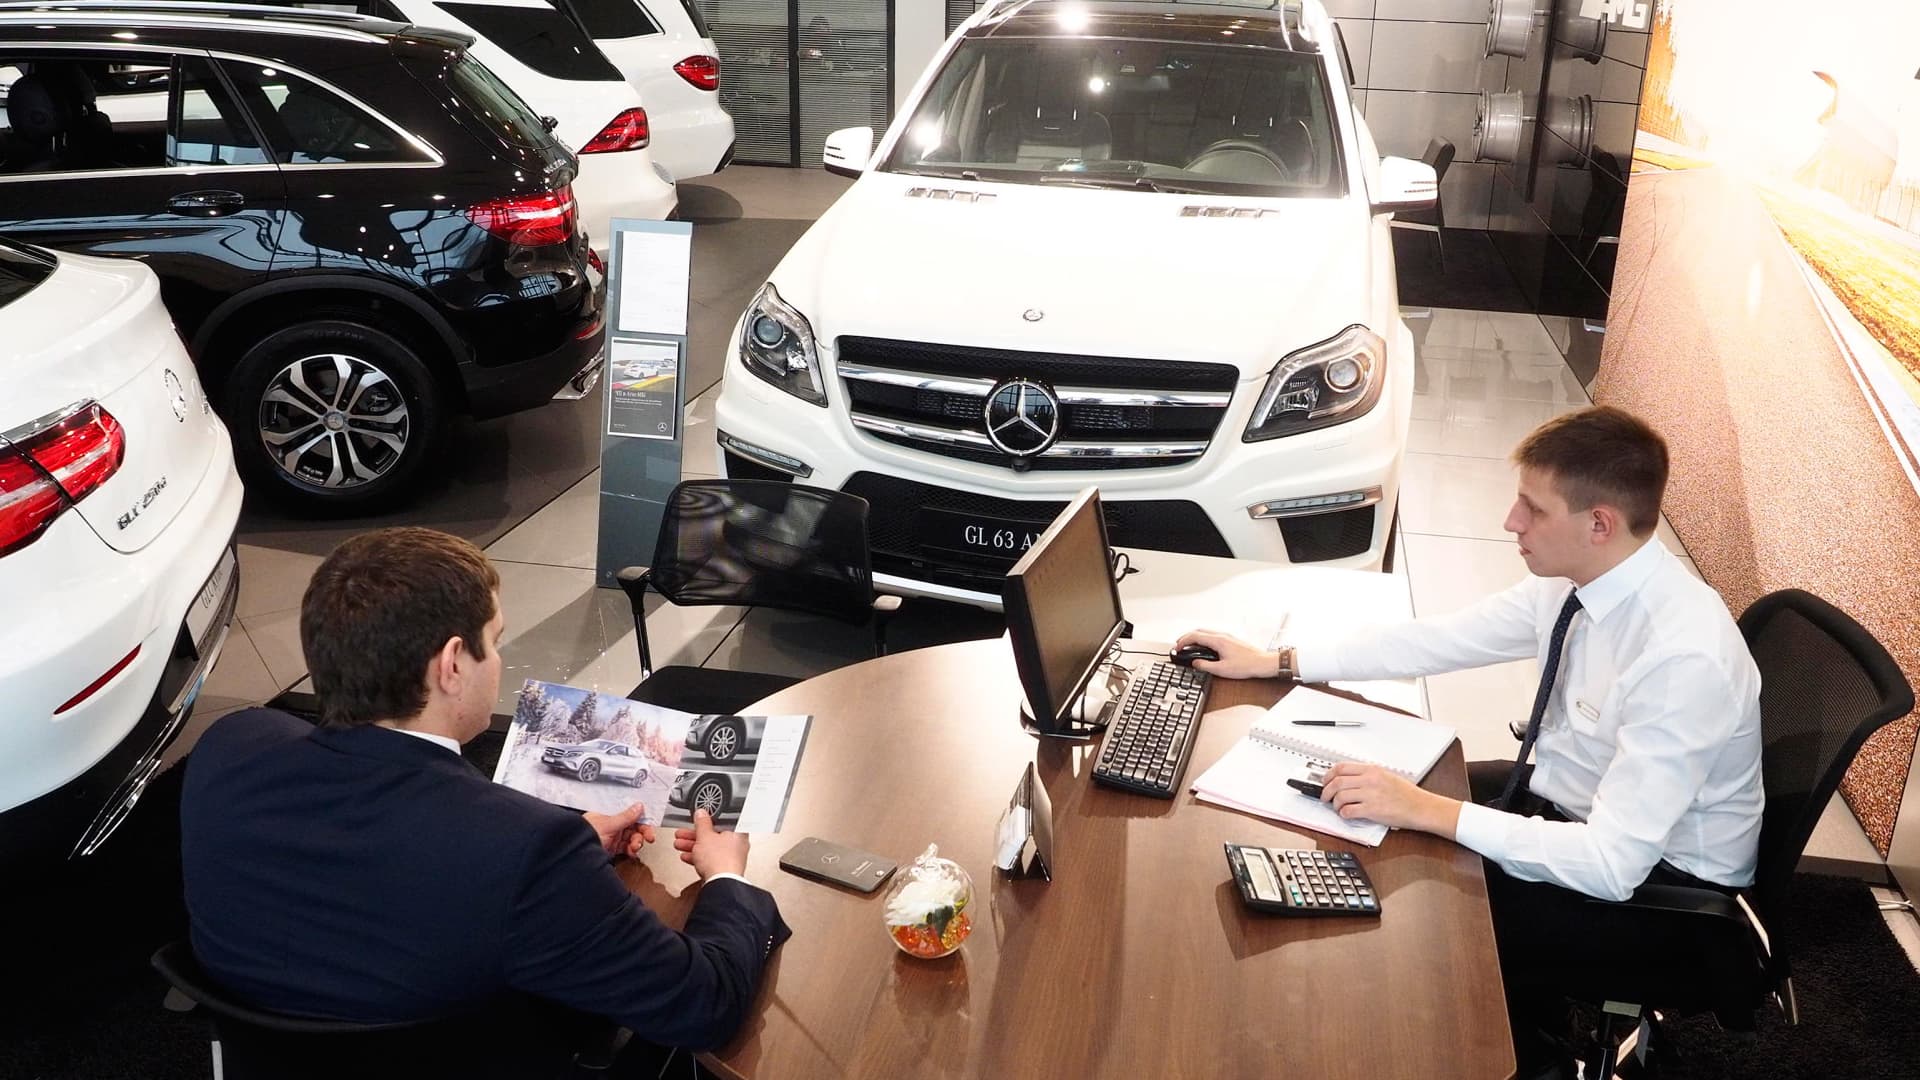 Former car salesman: Never say this 1 thing when negotiating a deal